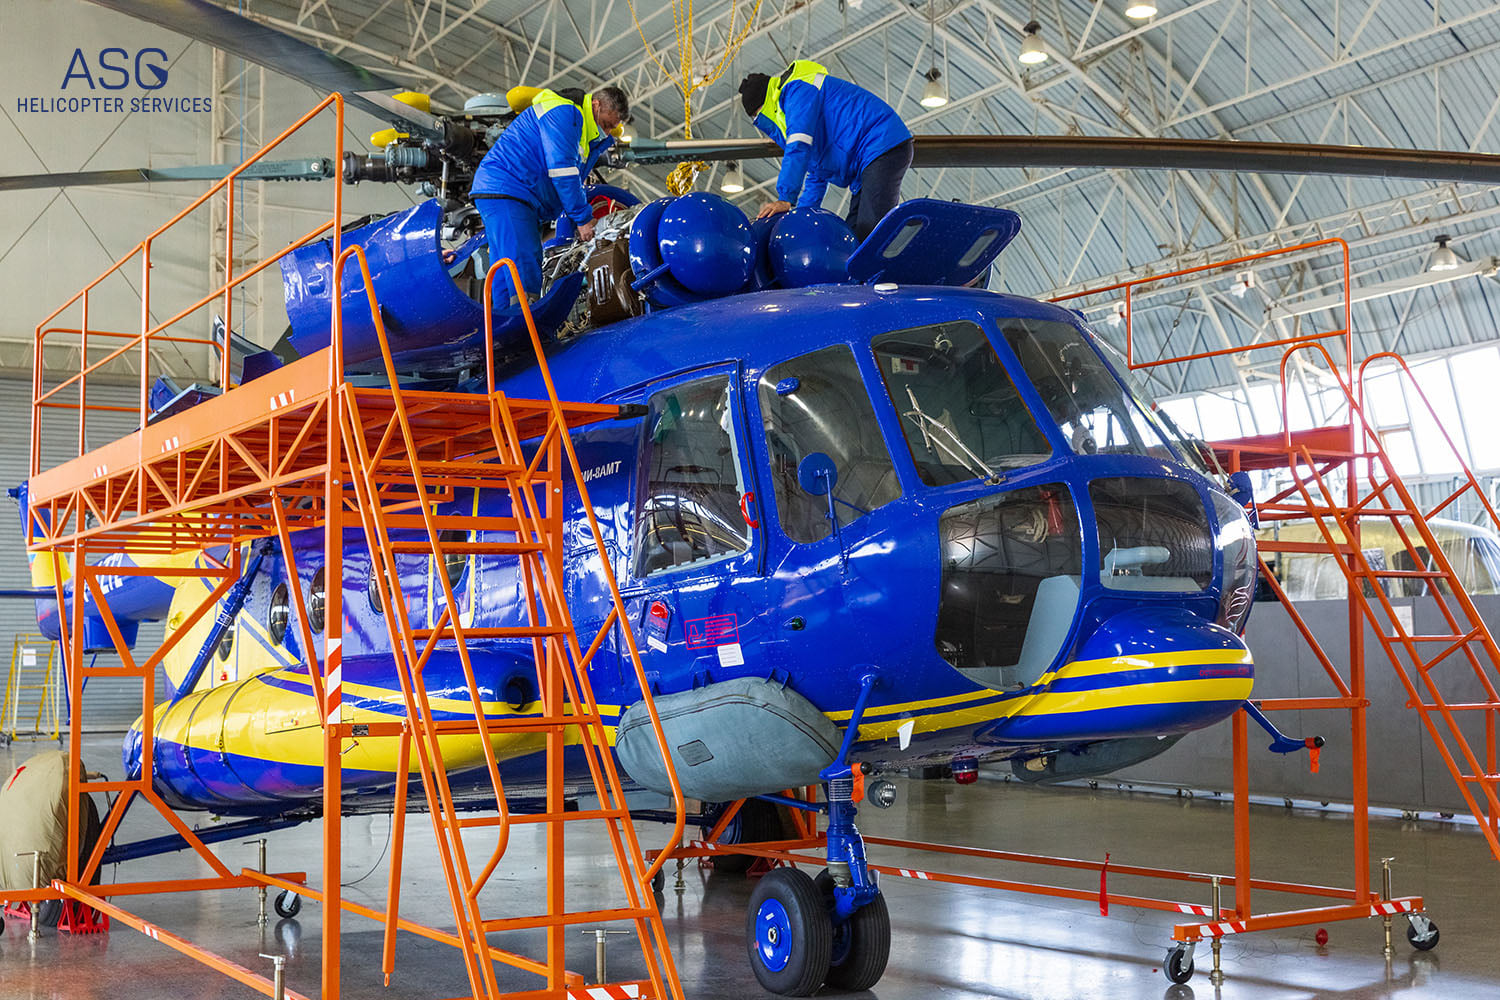 Overhaul of another Russian-made helicopter completed in Azerbaijan